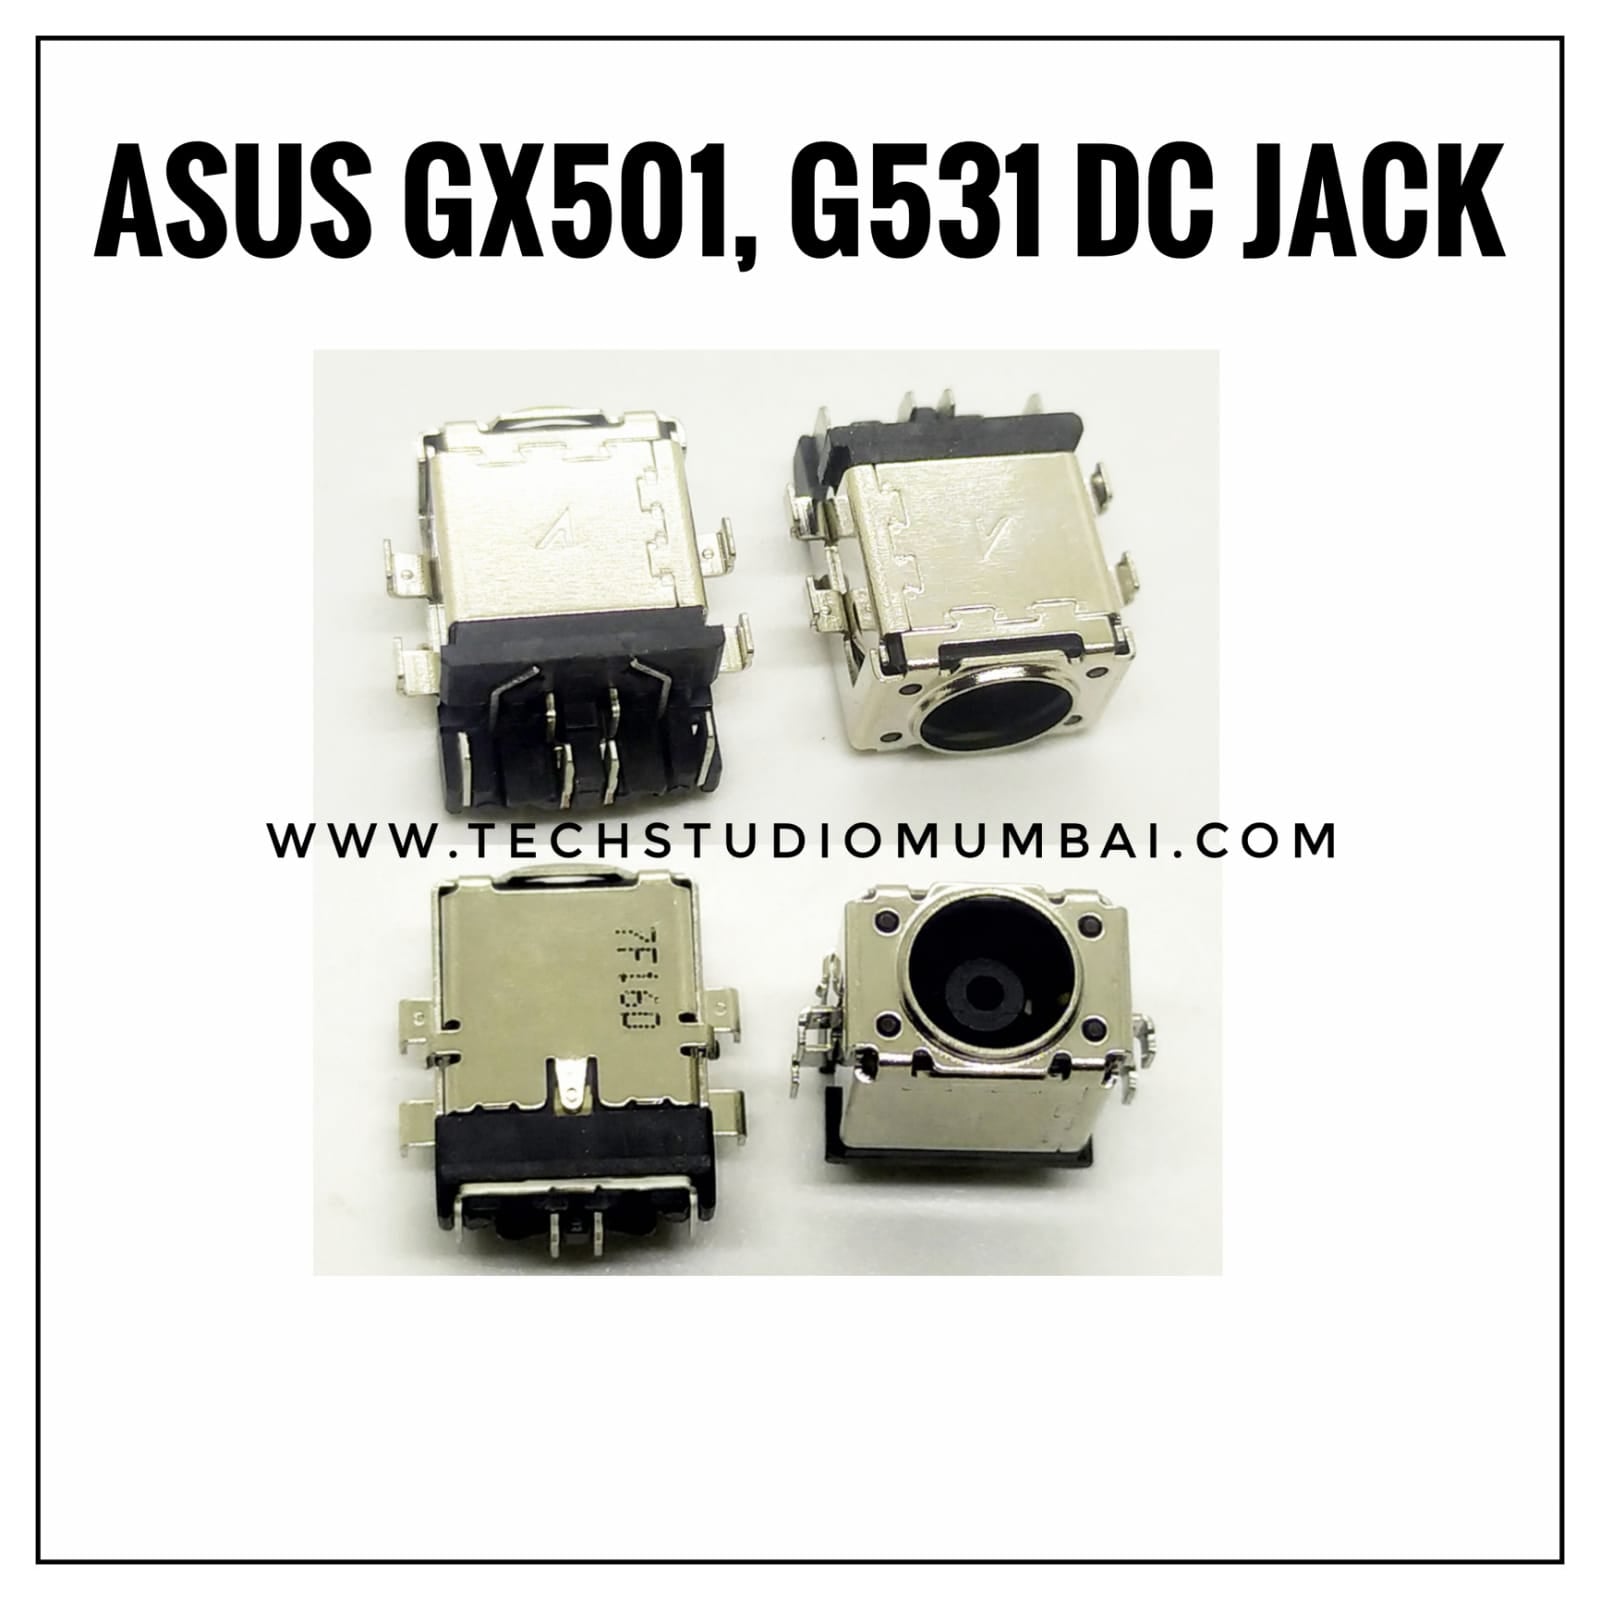 DC Jack for ASUS GX501 and G531